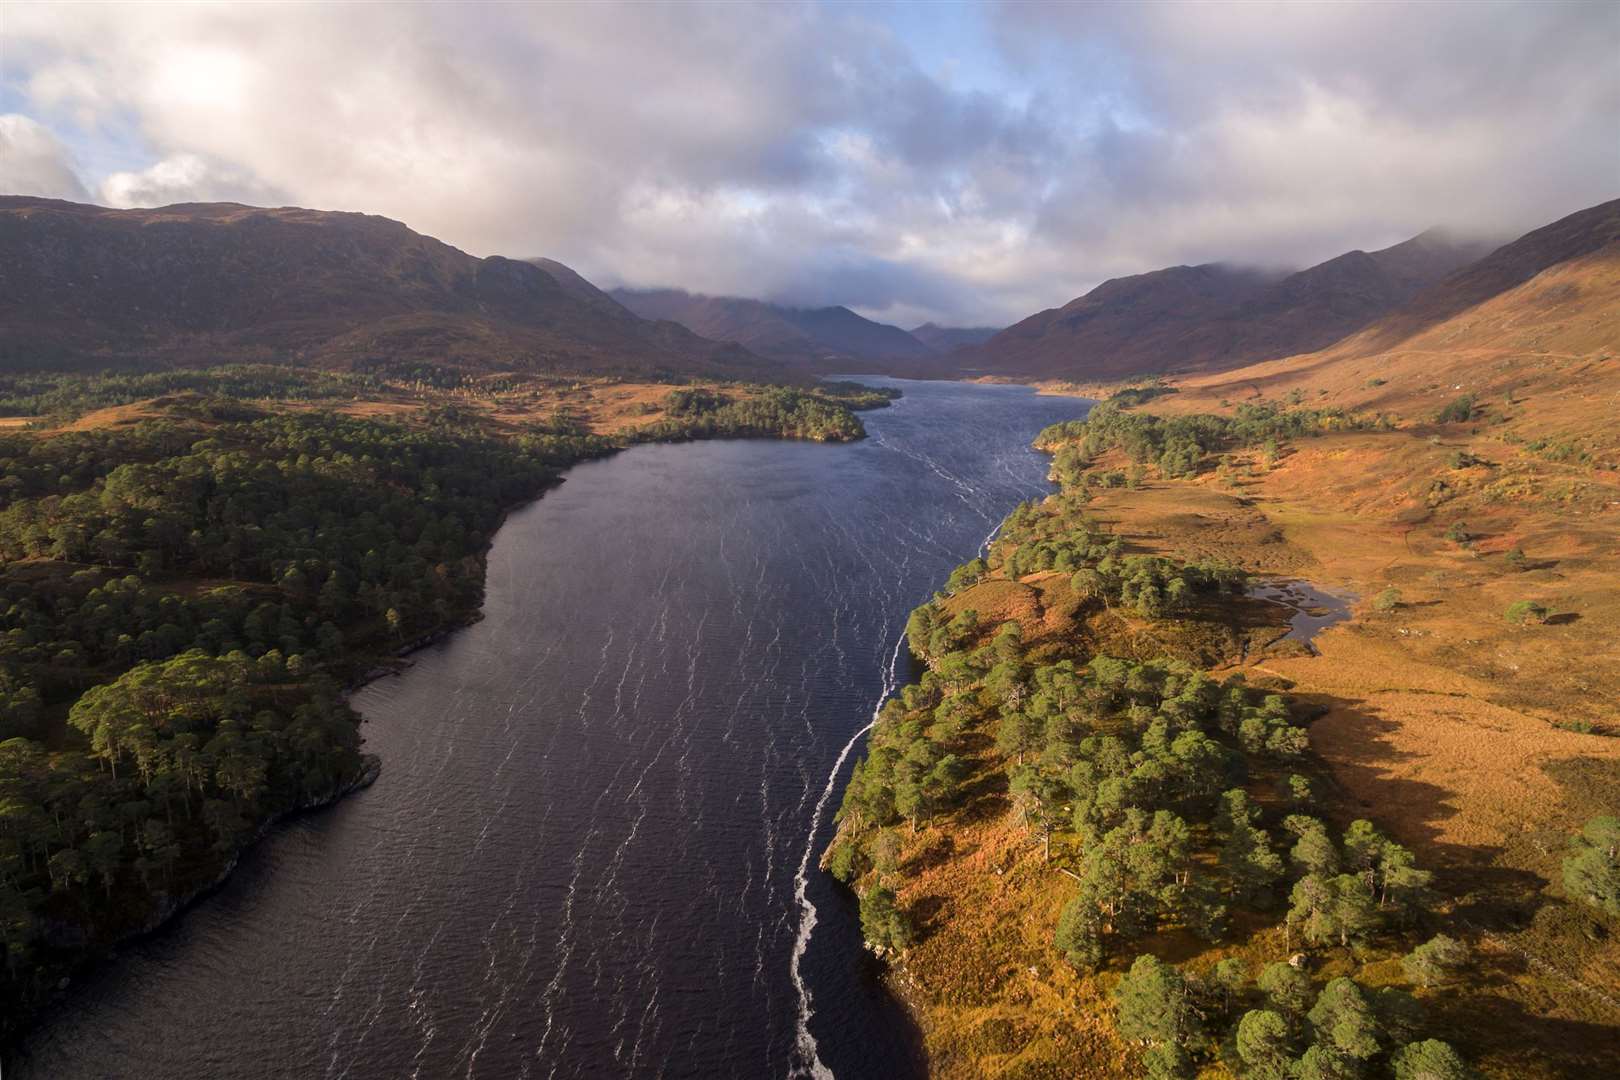 Scots pine and birch trees scatter the landscape by Loch Affric, Scotland.